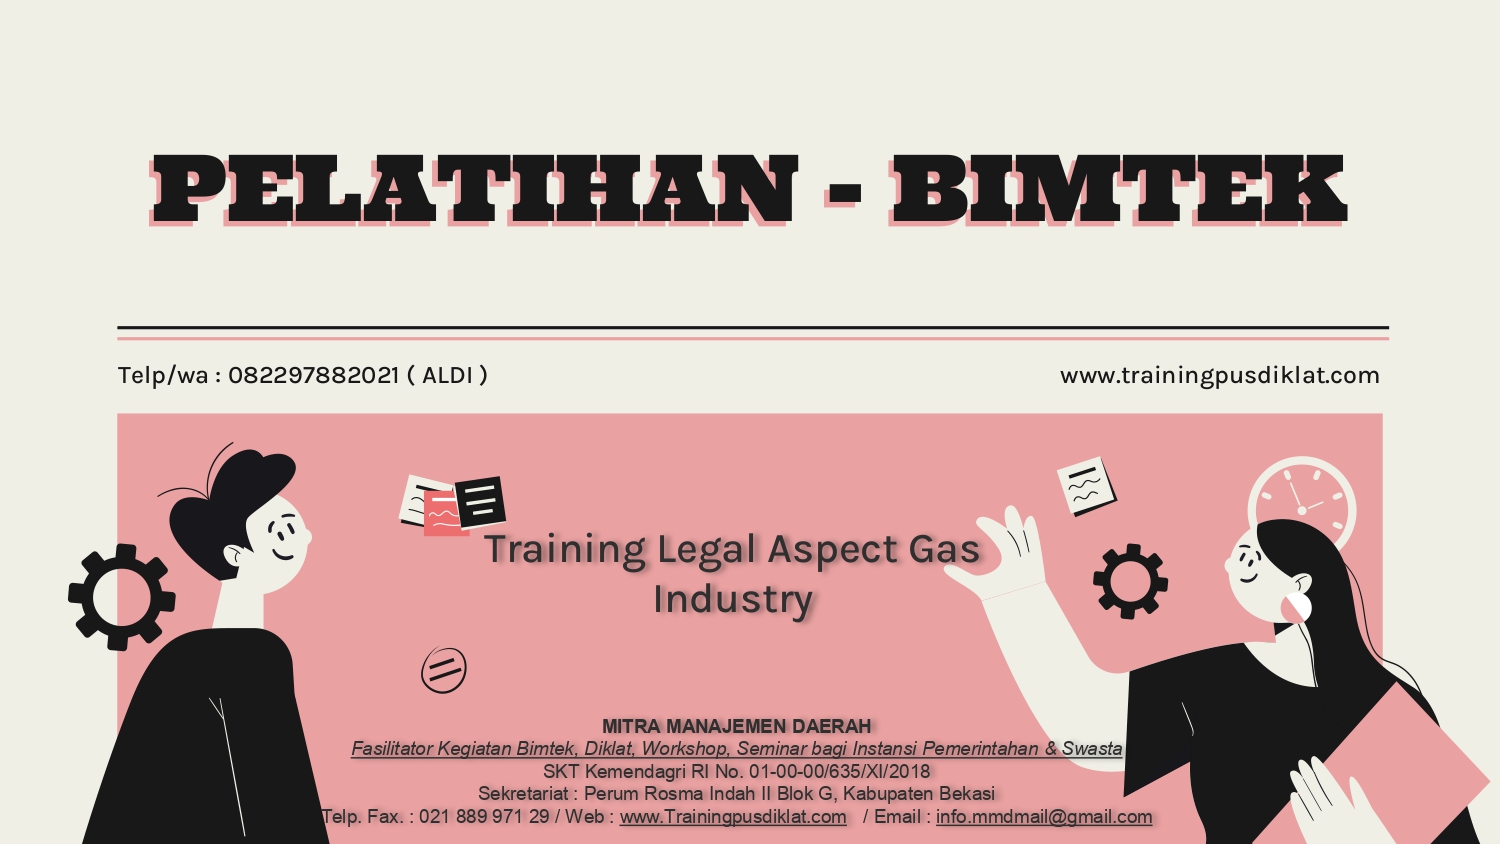 Training Legal Aspect Gas Industry